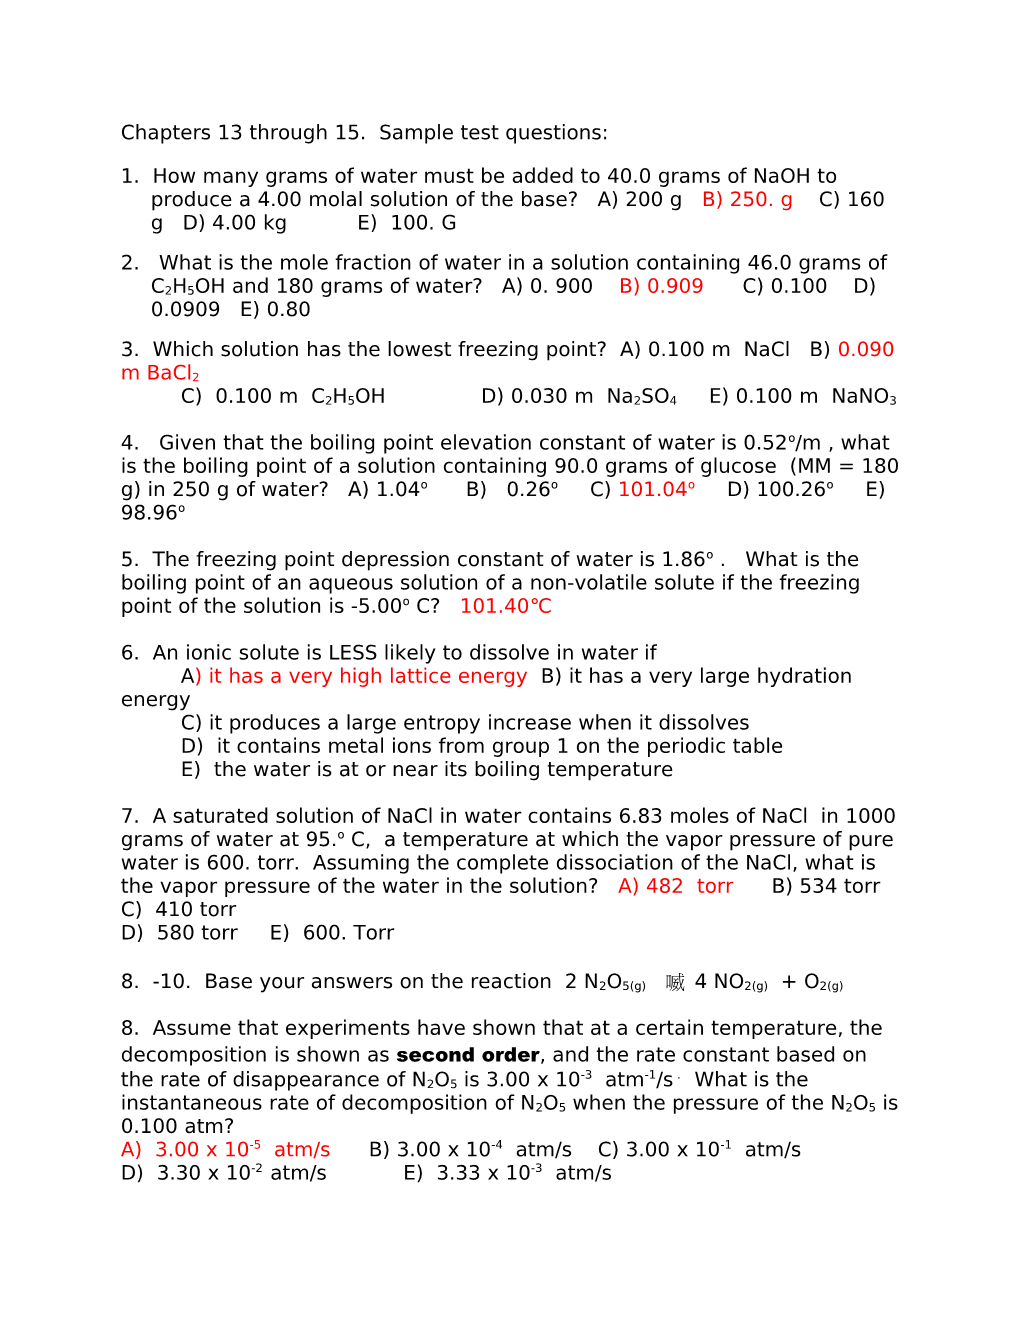 Chapters 13 Through 15. Sample Test Questions